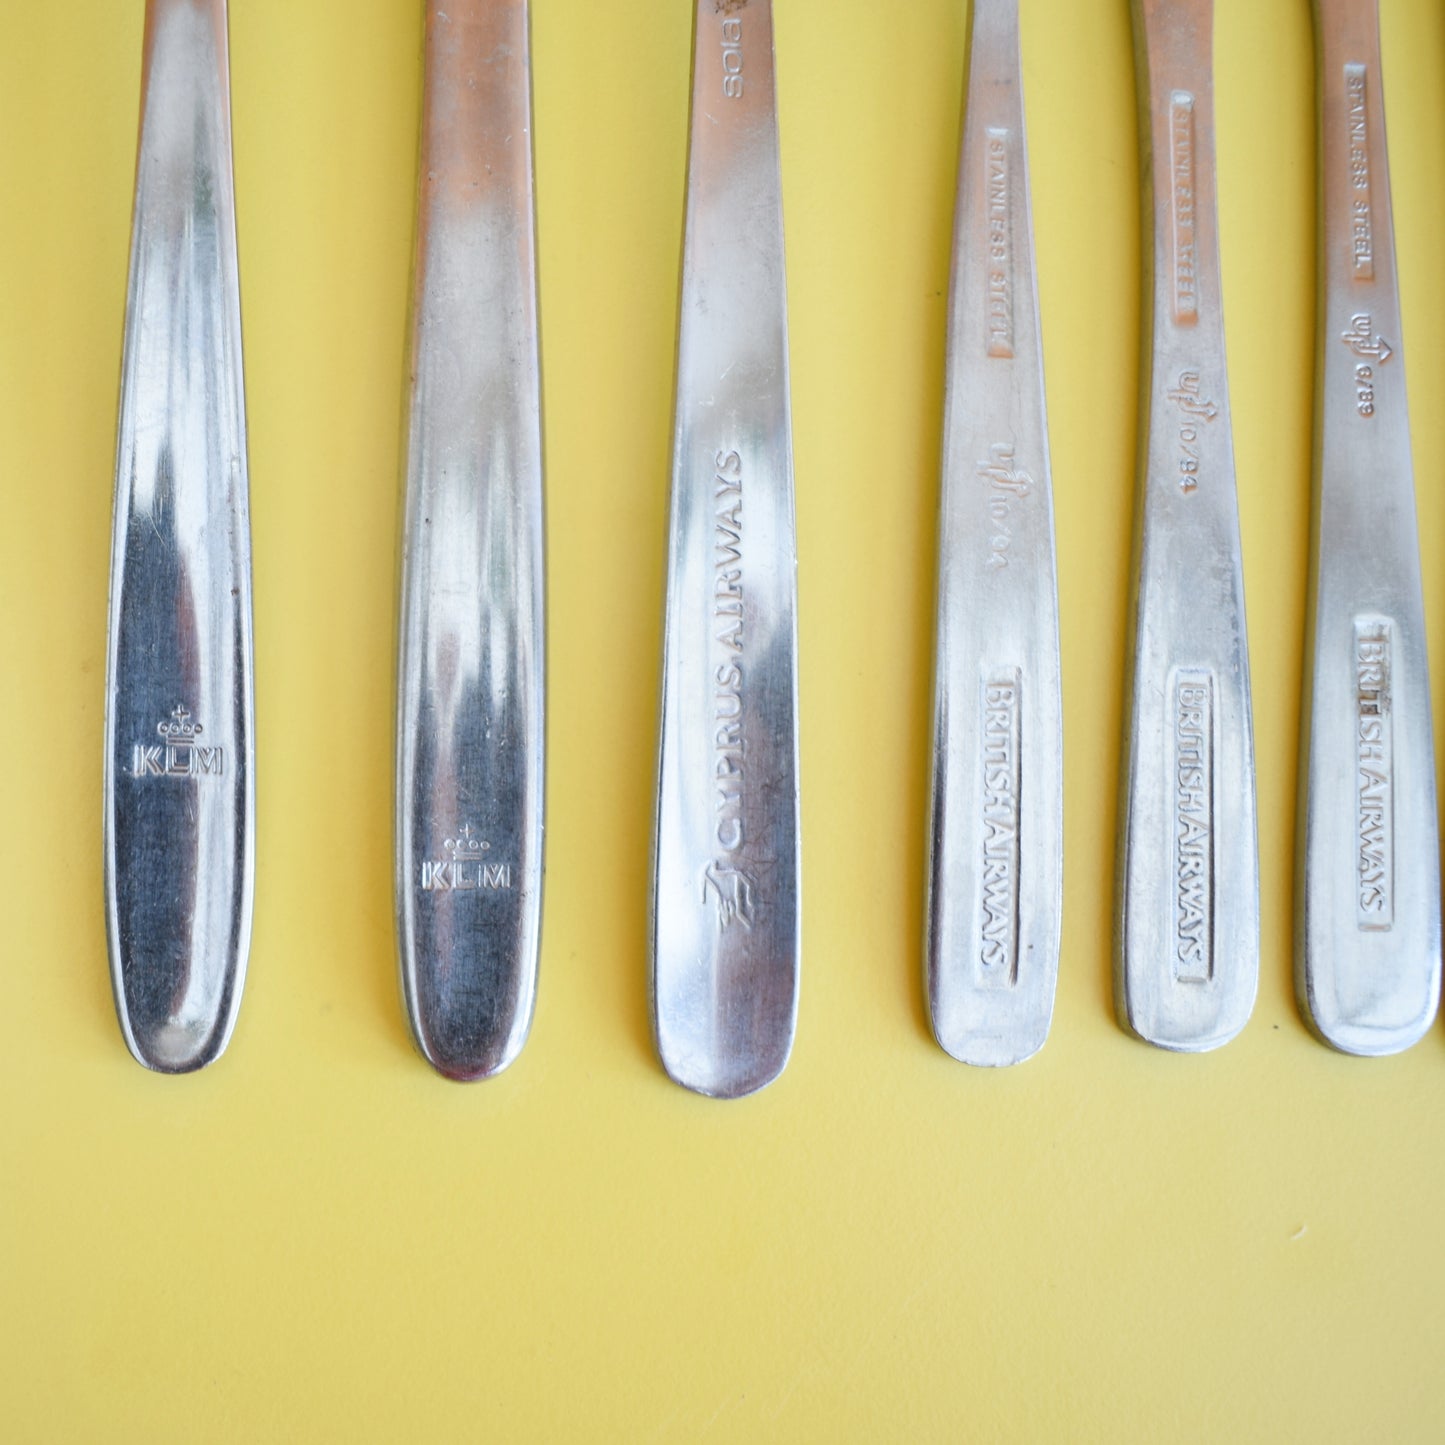 Vintage 1960s Stainless Steel Cutlery - Airline